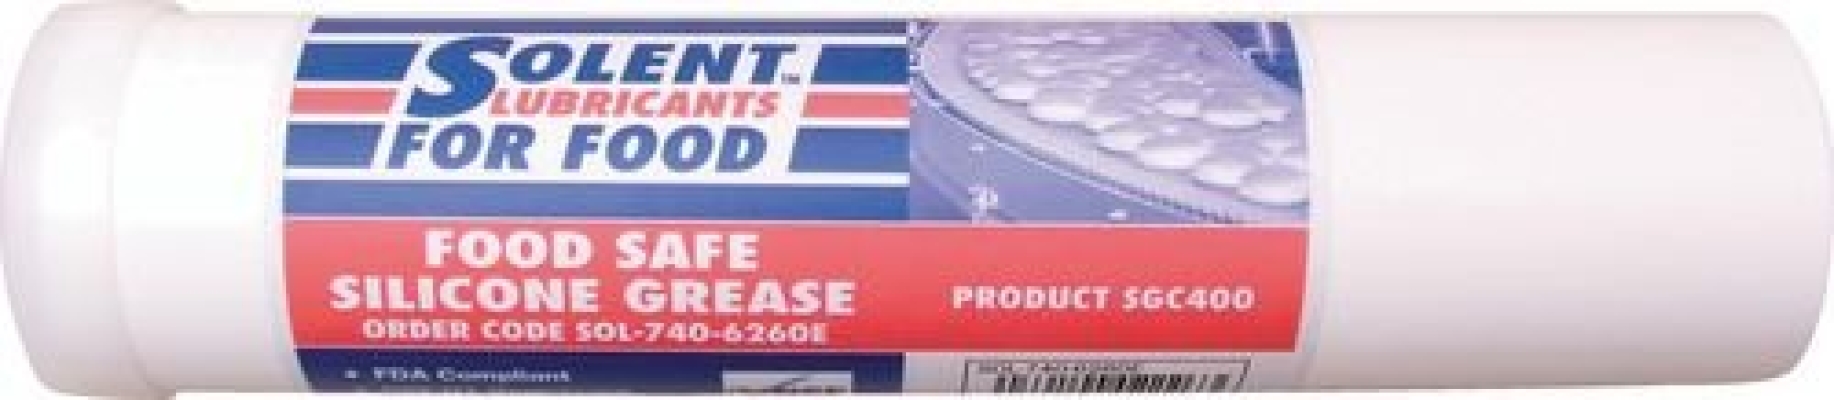 Food Safe Silicone Grease 12.5kg, SOL7406290H